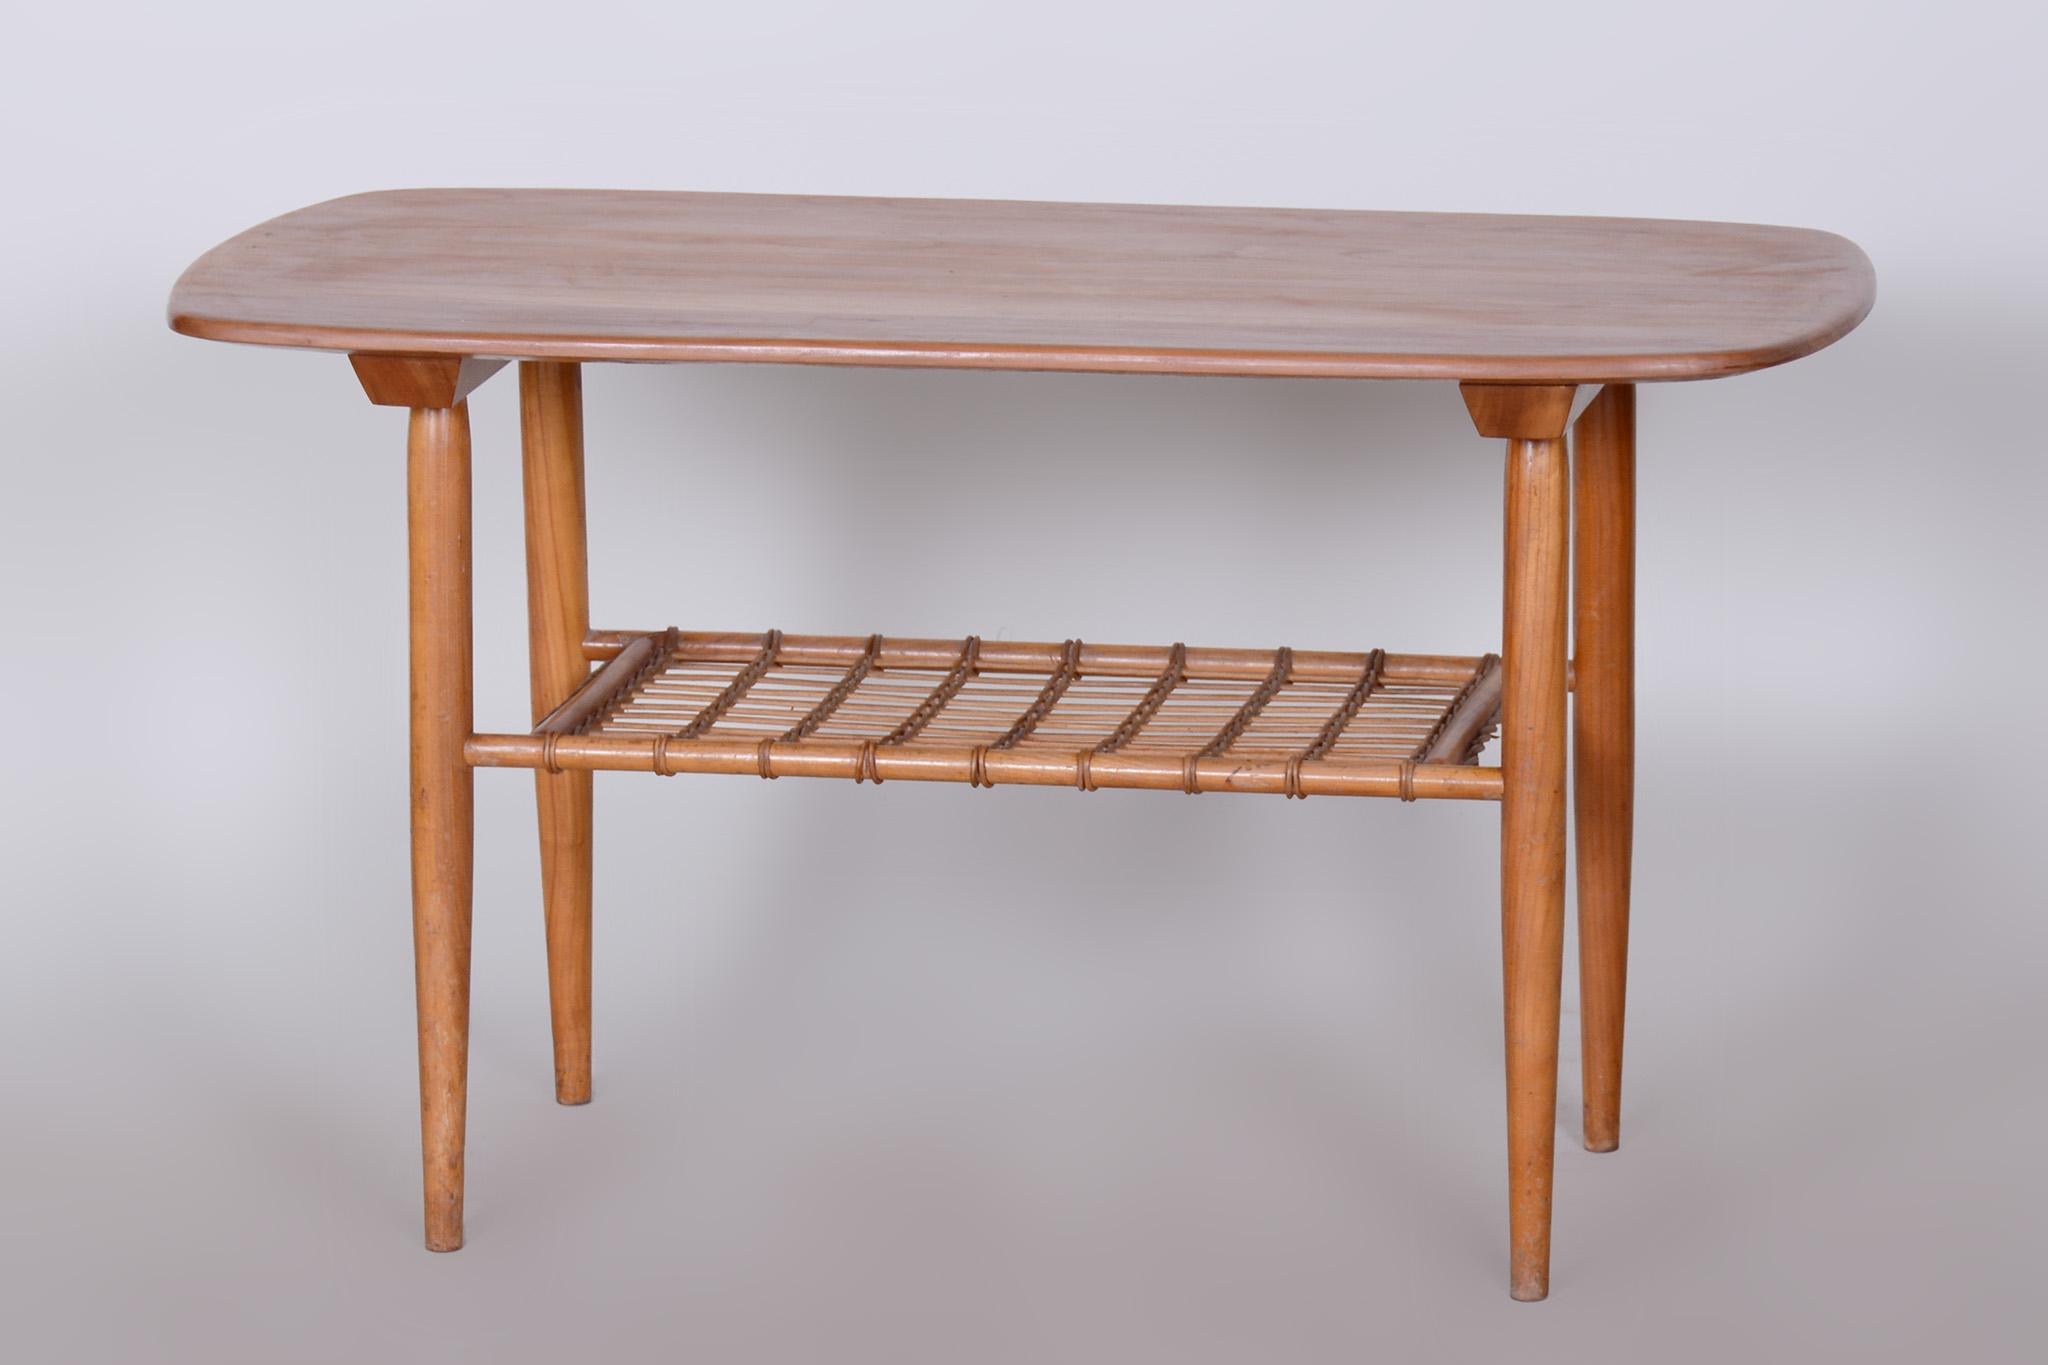 Restored midcentury style coffee table

Period: 1950-1959
Source: Czechia
Material: Cherry-Tree, rattan

Stable solid cherry wood construction with rattan.
Revived polish.